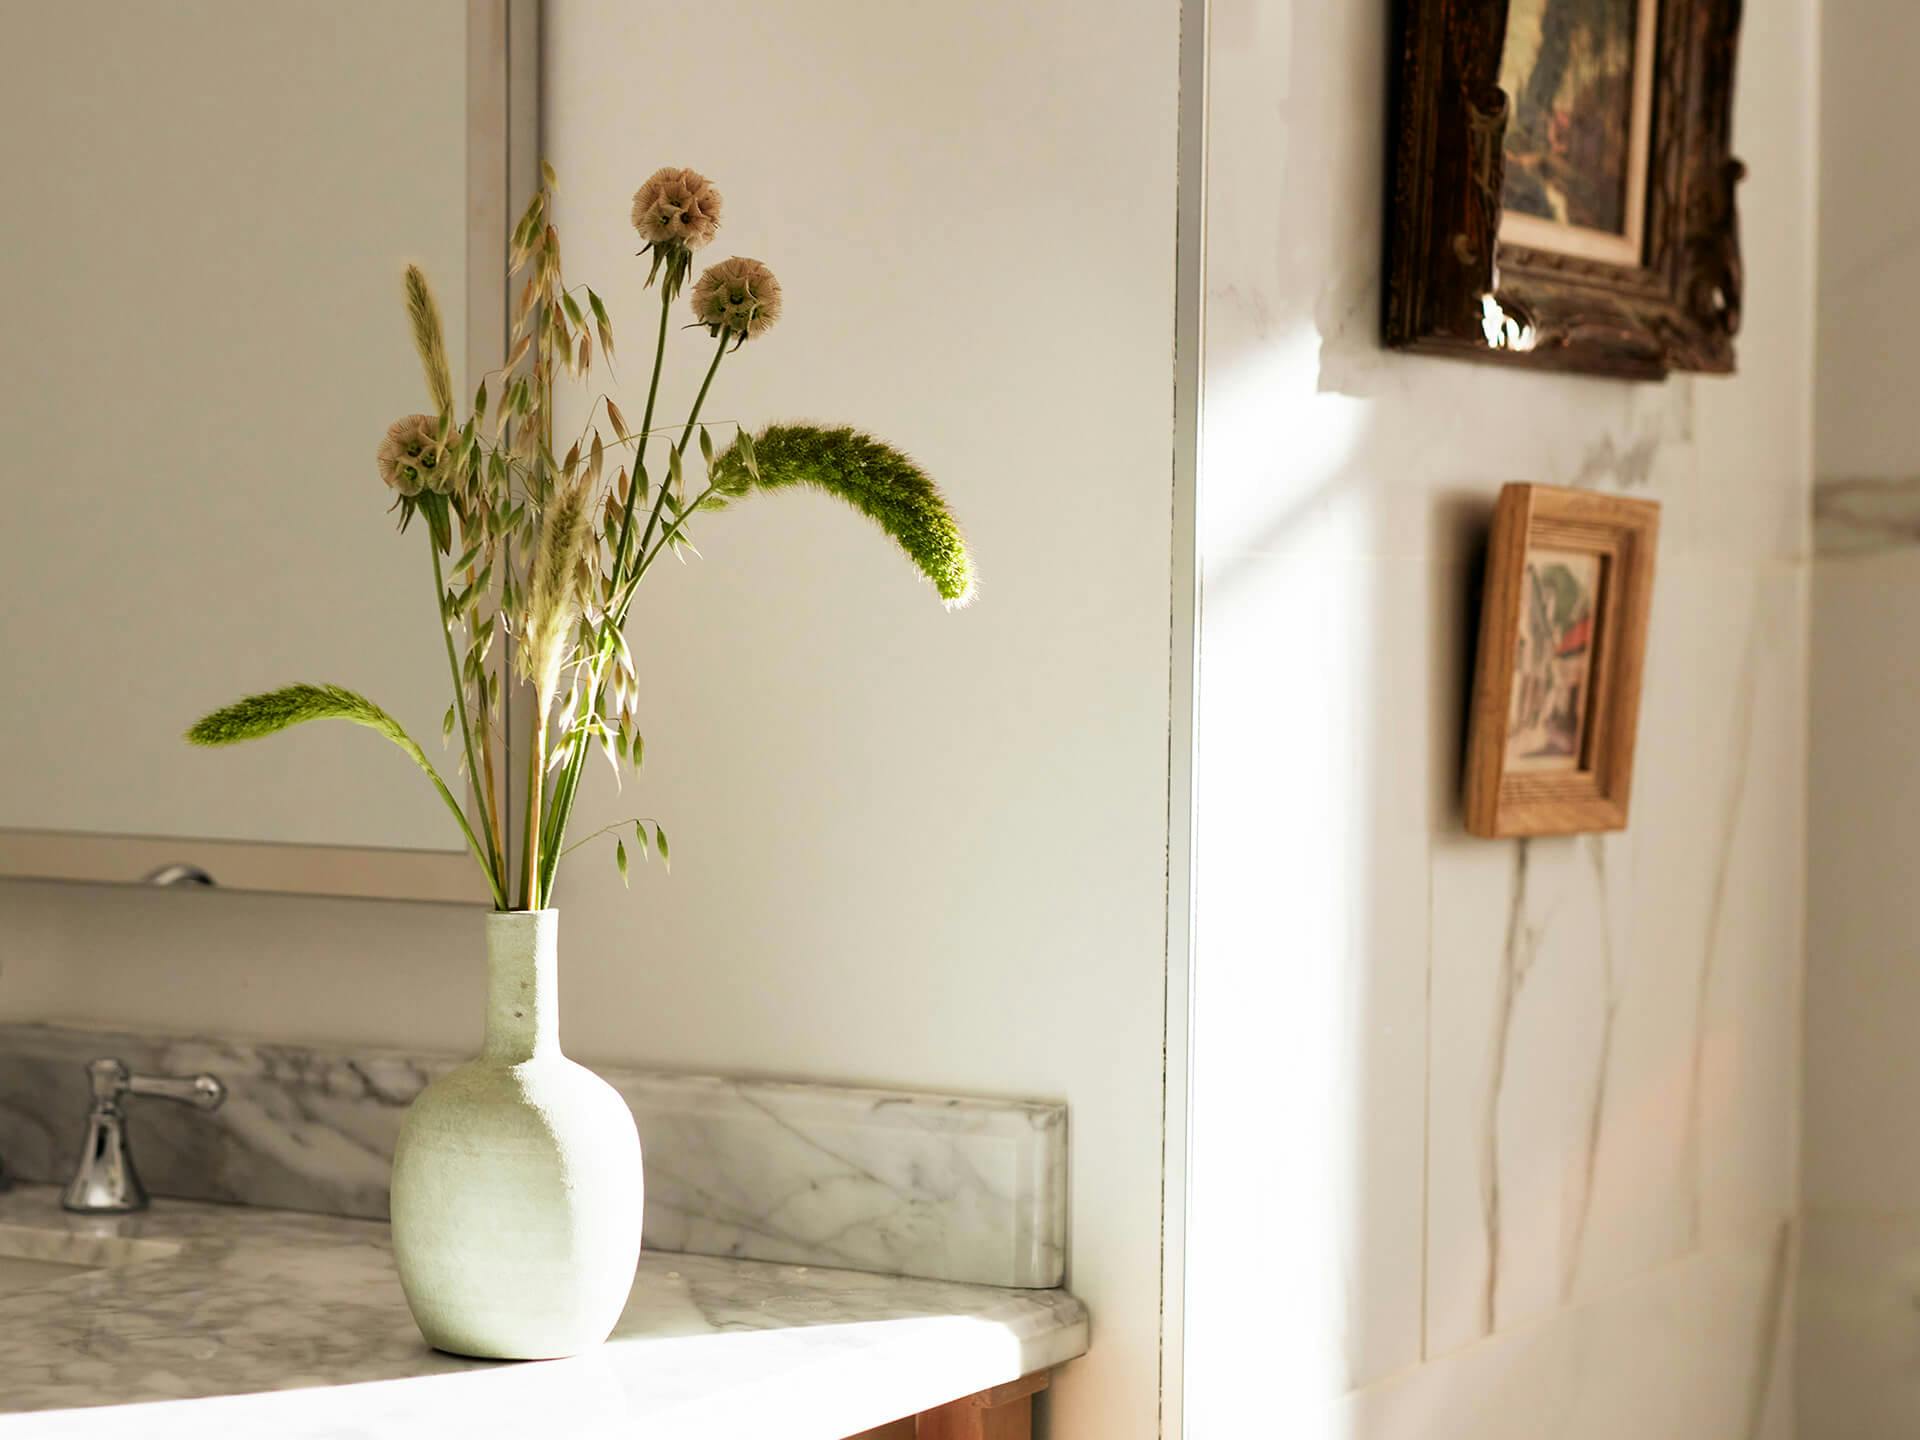 Close up of a bathroom counter with a vase of wild greenery and two small antique framed images on a wall